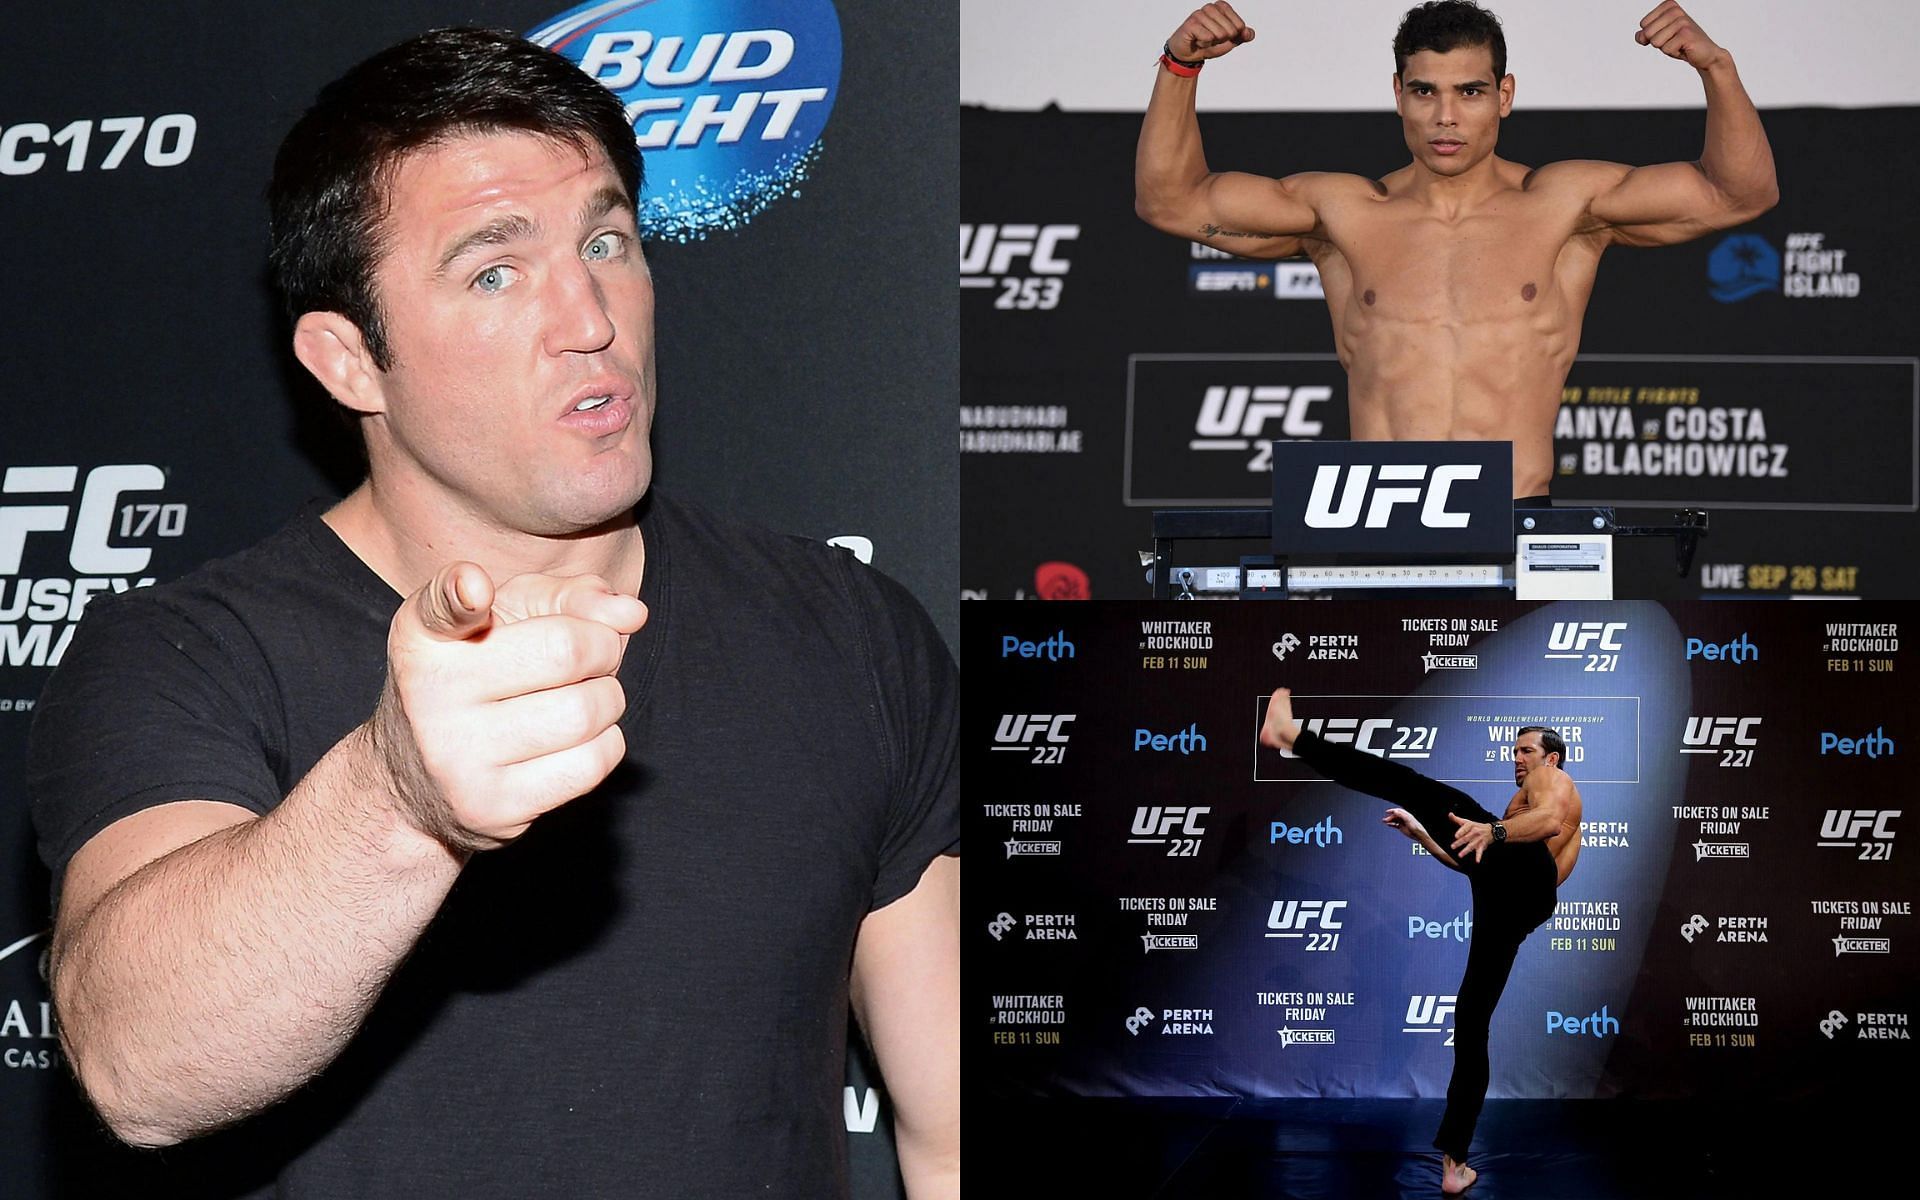 Chael Sonnen (left), Paulo Costa (top right), and Luke Rockhold (bottom right) [Images courtesy of Getty]